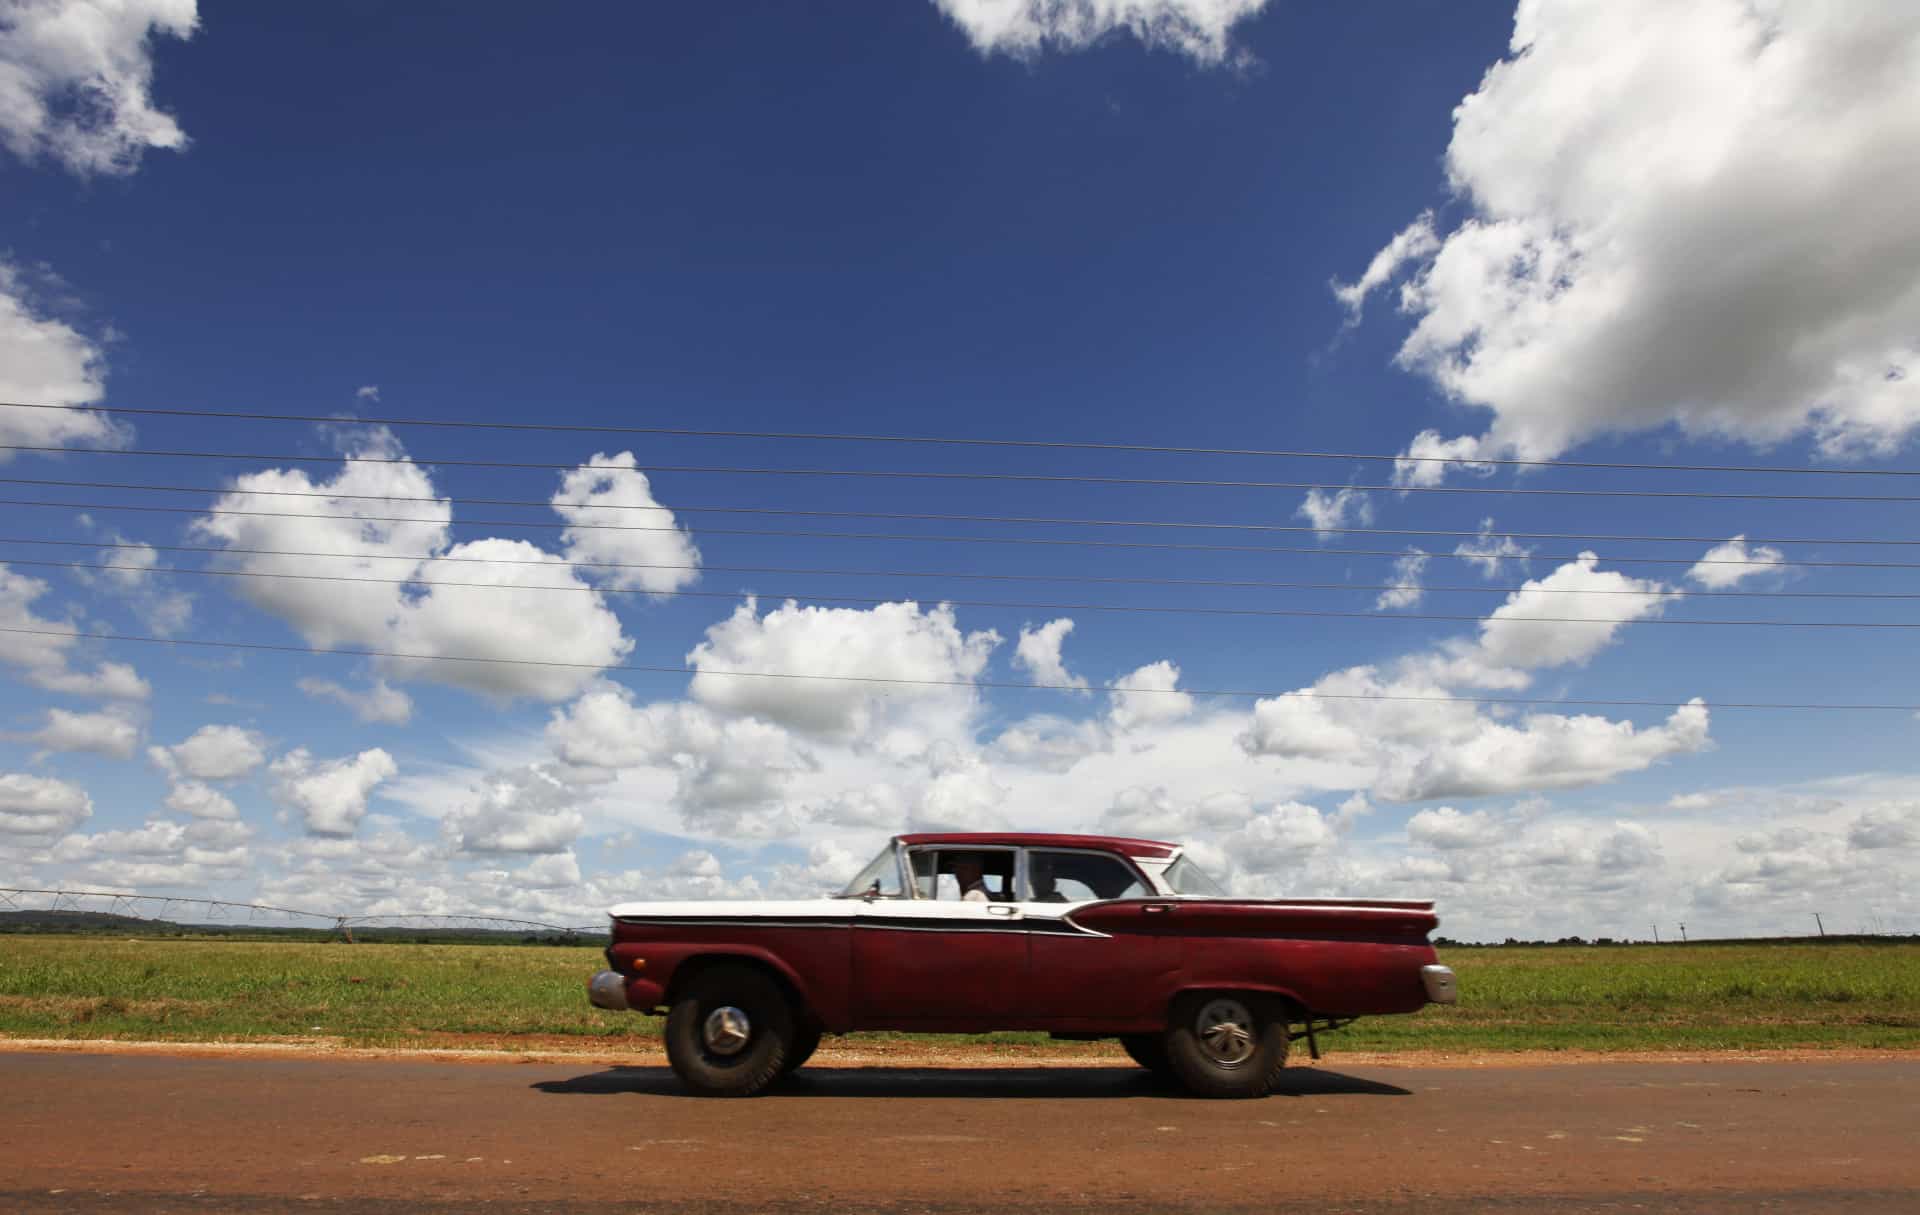 Cuba's classic cars are a tourist attraction in and of themselves.